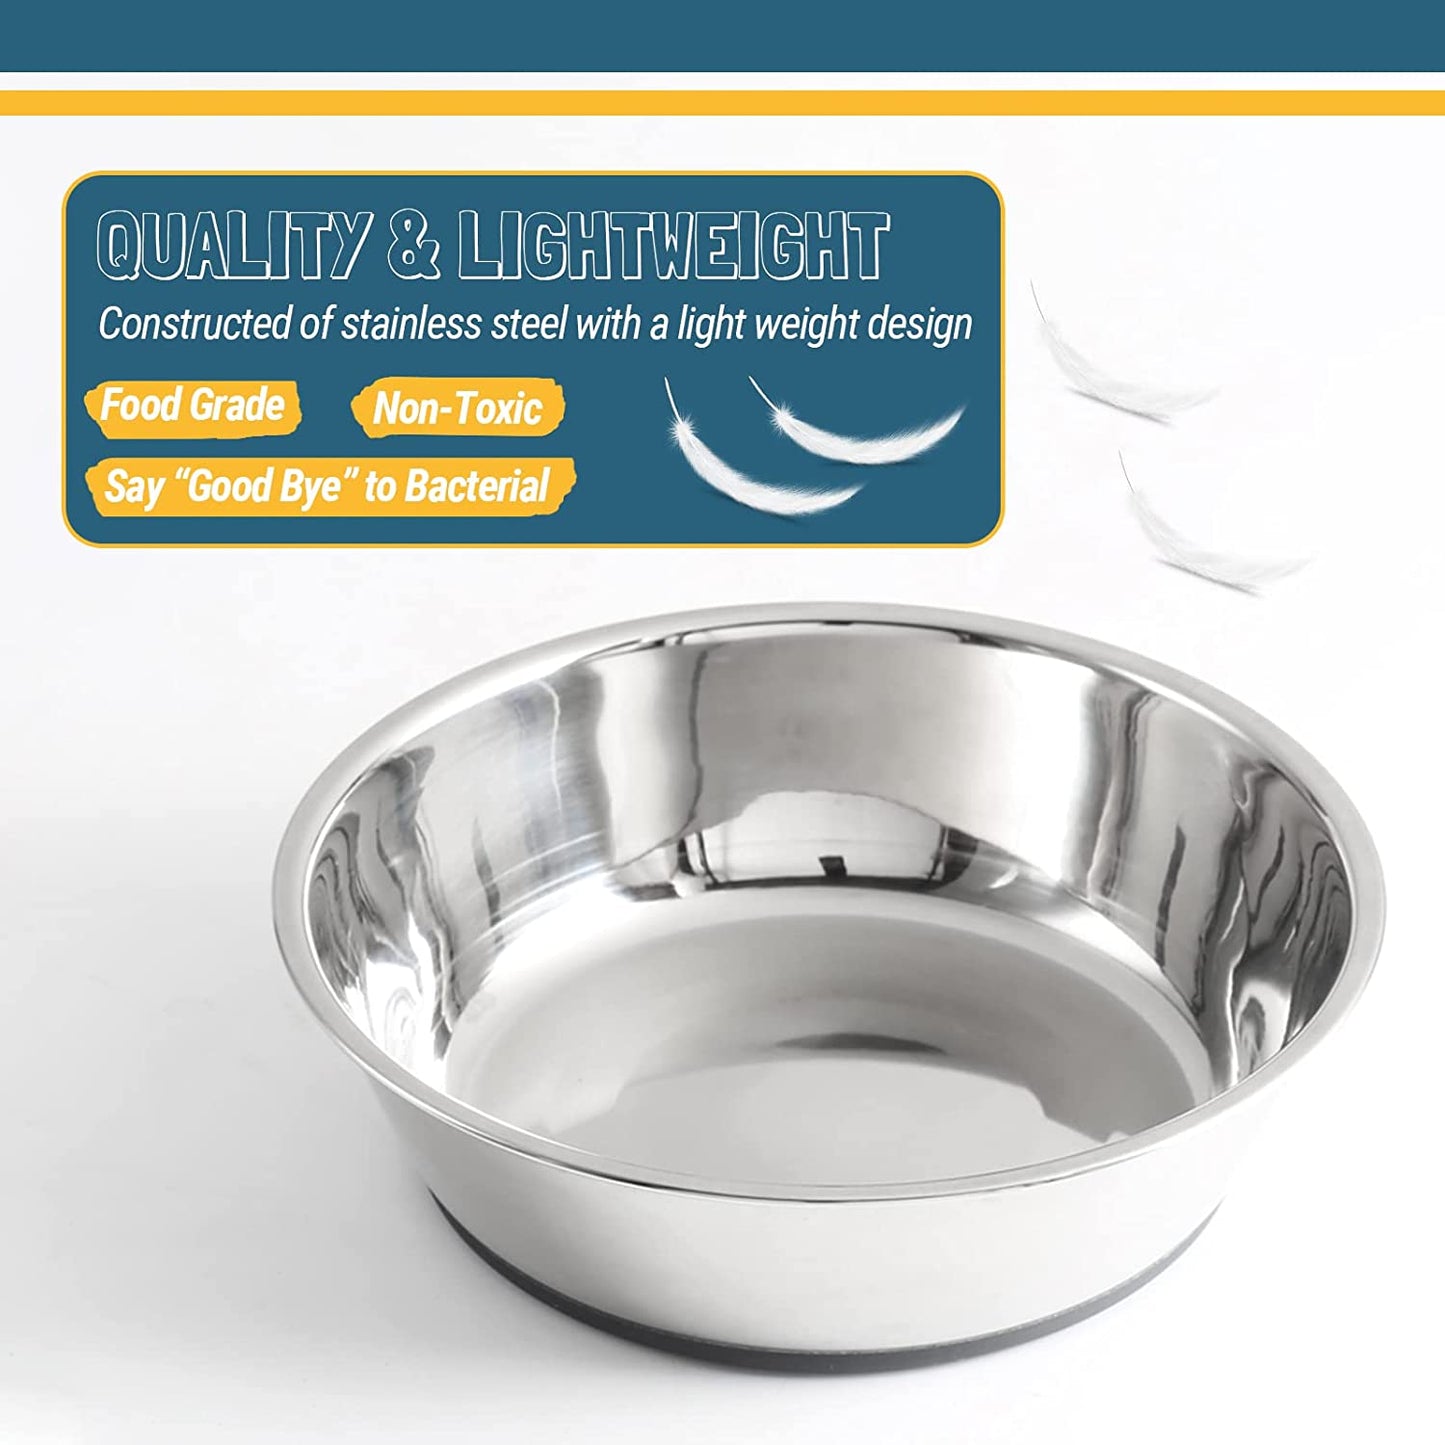 PEGGY11 Lightweight Stainless Steel Cat Bowls - 3 Cup, 2 Pack